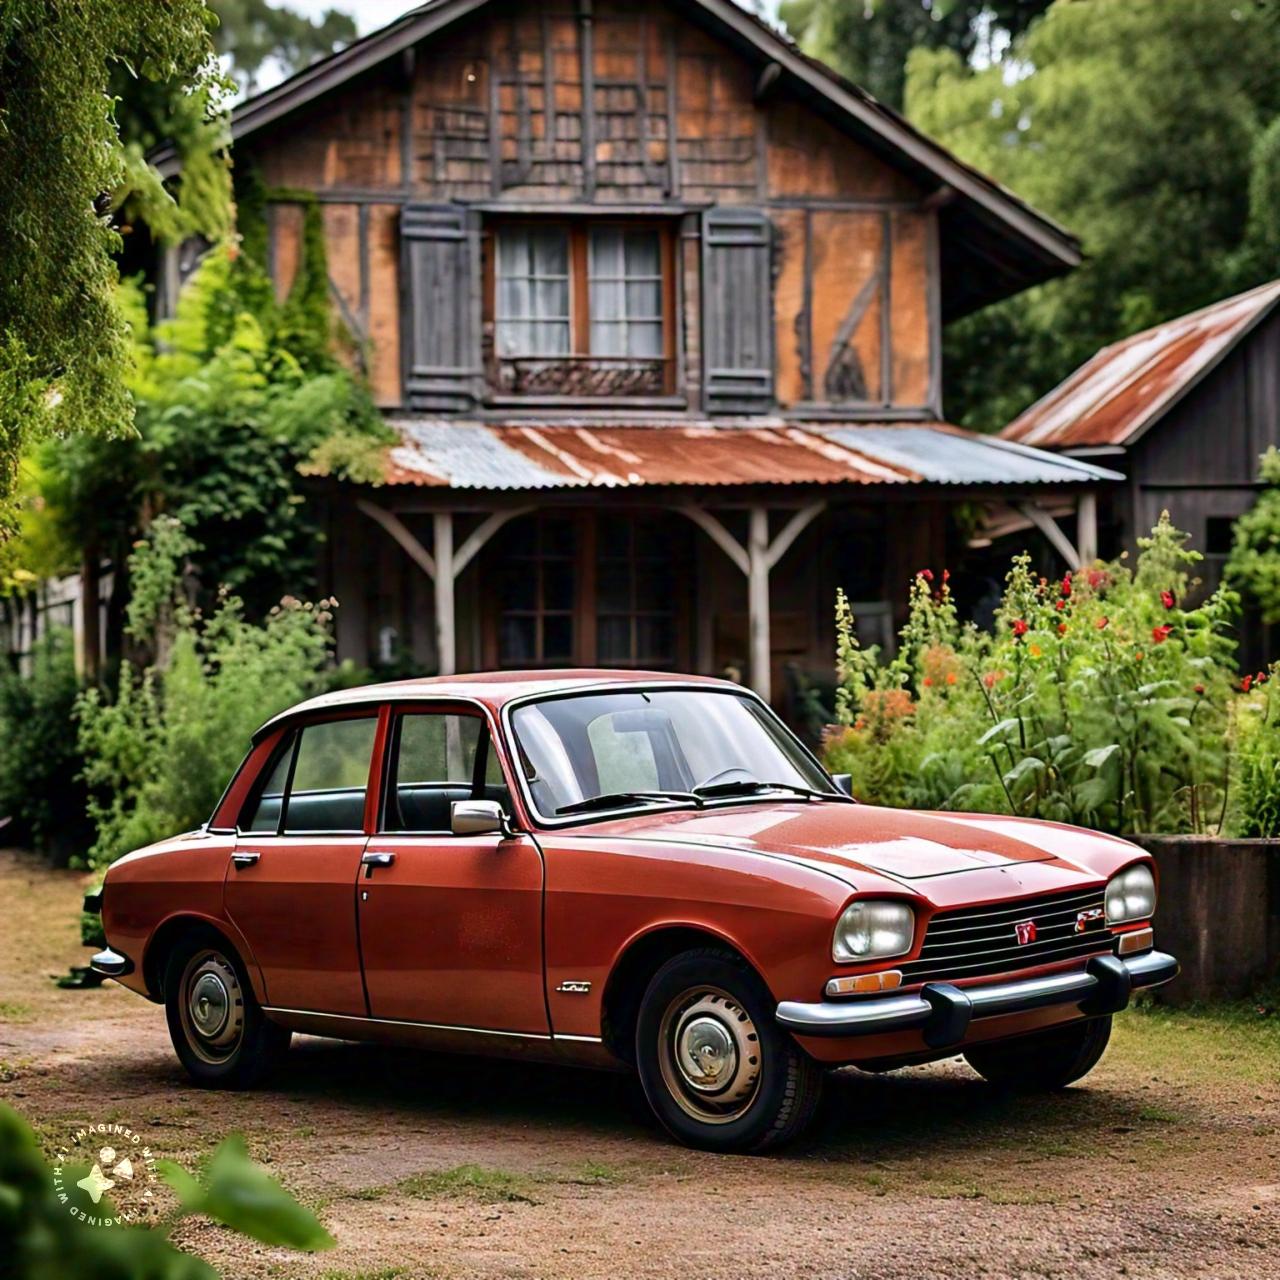 Rediscovering nostalgia: The timeless appeal of Peugeot 504